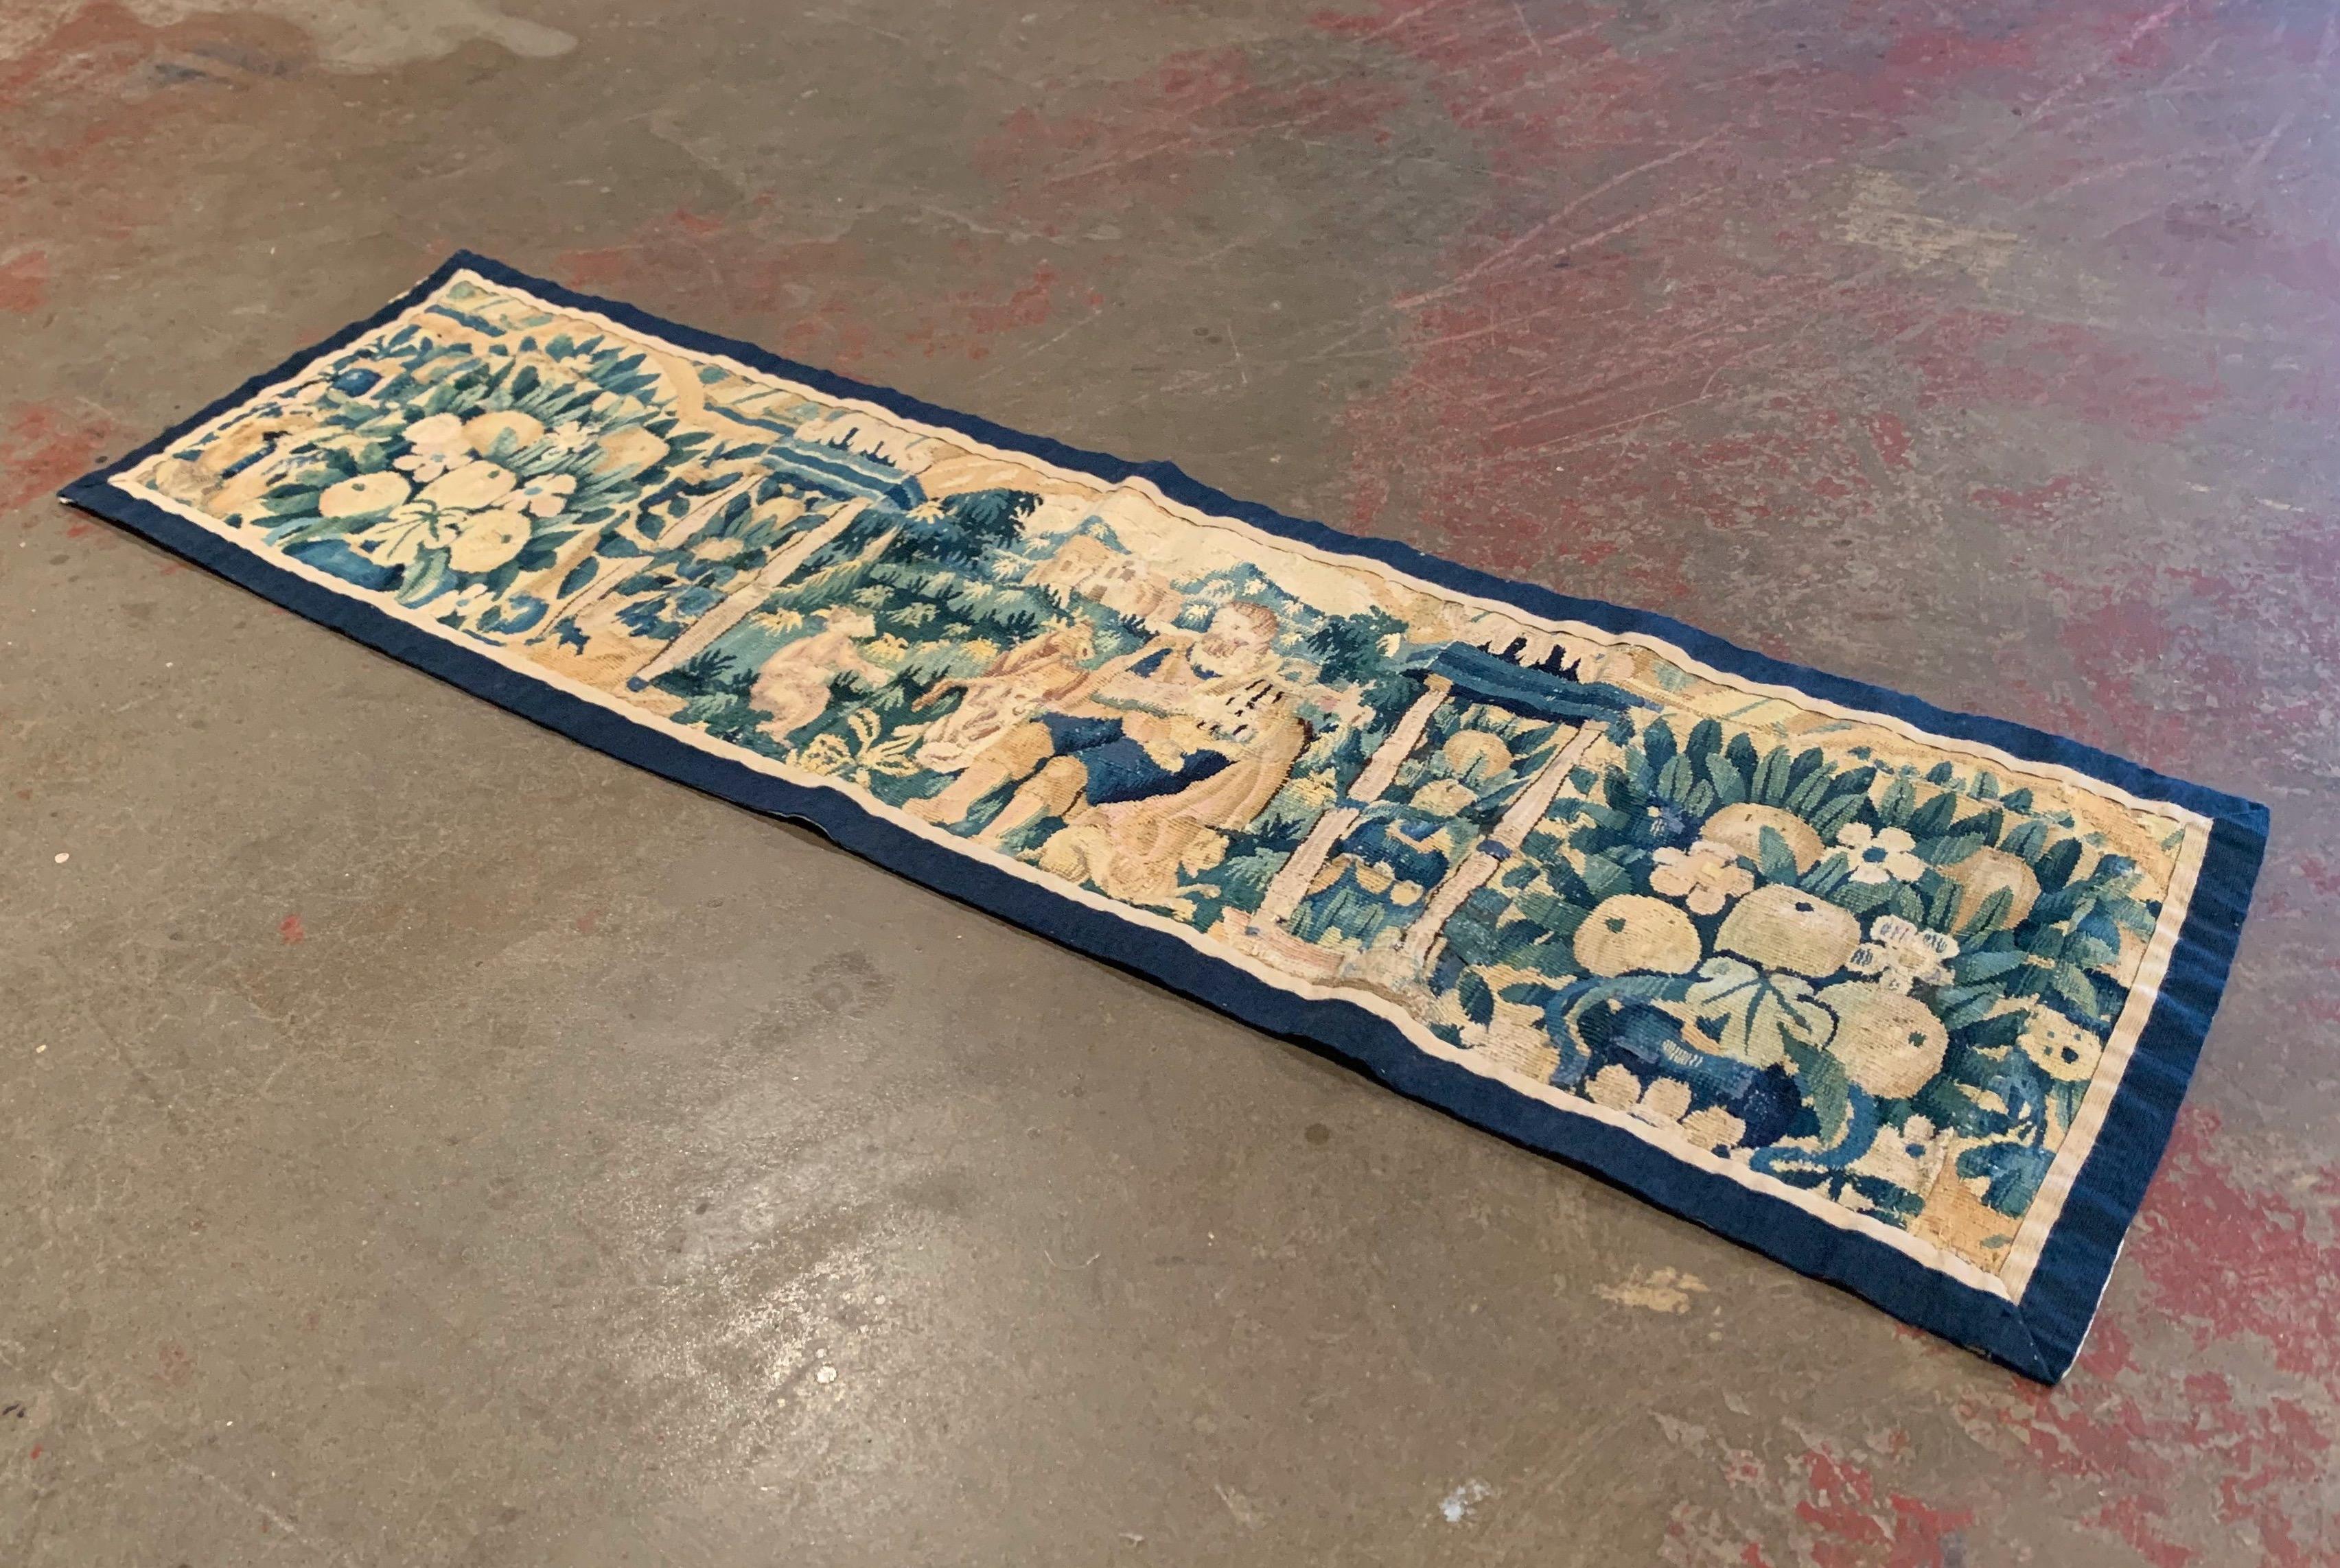 Dress a dining room table with this antique runner; handwoven in Aubusson France circa 1760, the tapestry features a center medallion depicting a wisdom man teaching a youngster, and is flanked with ruins, fruit and floral motifs on both sides. The